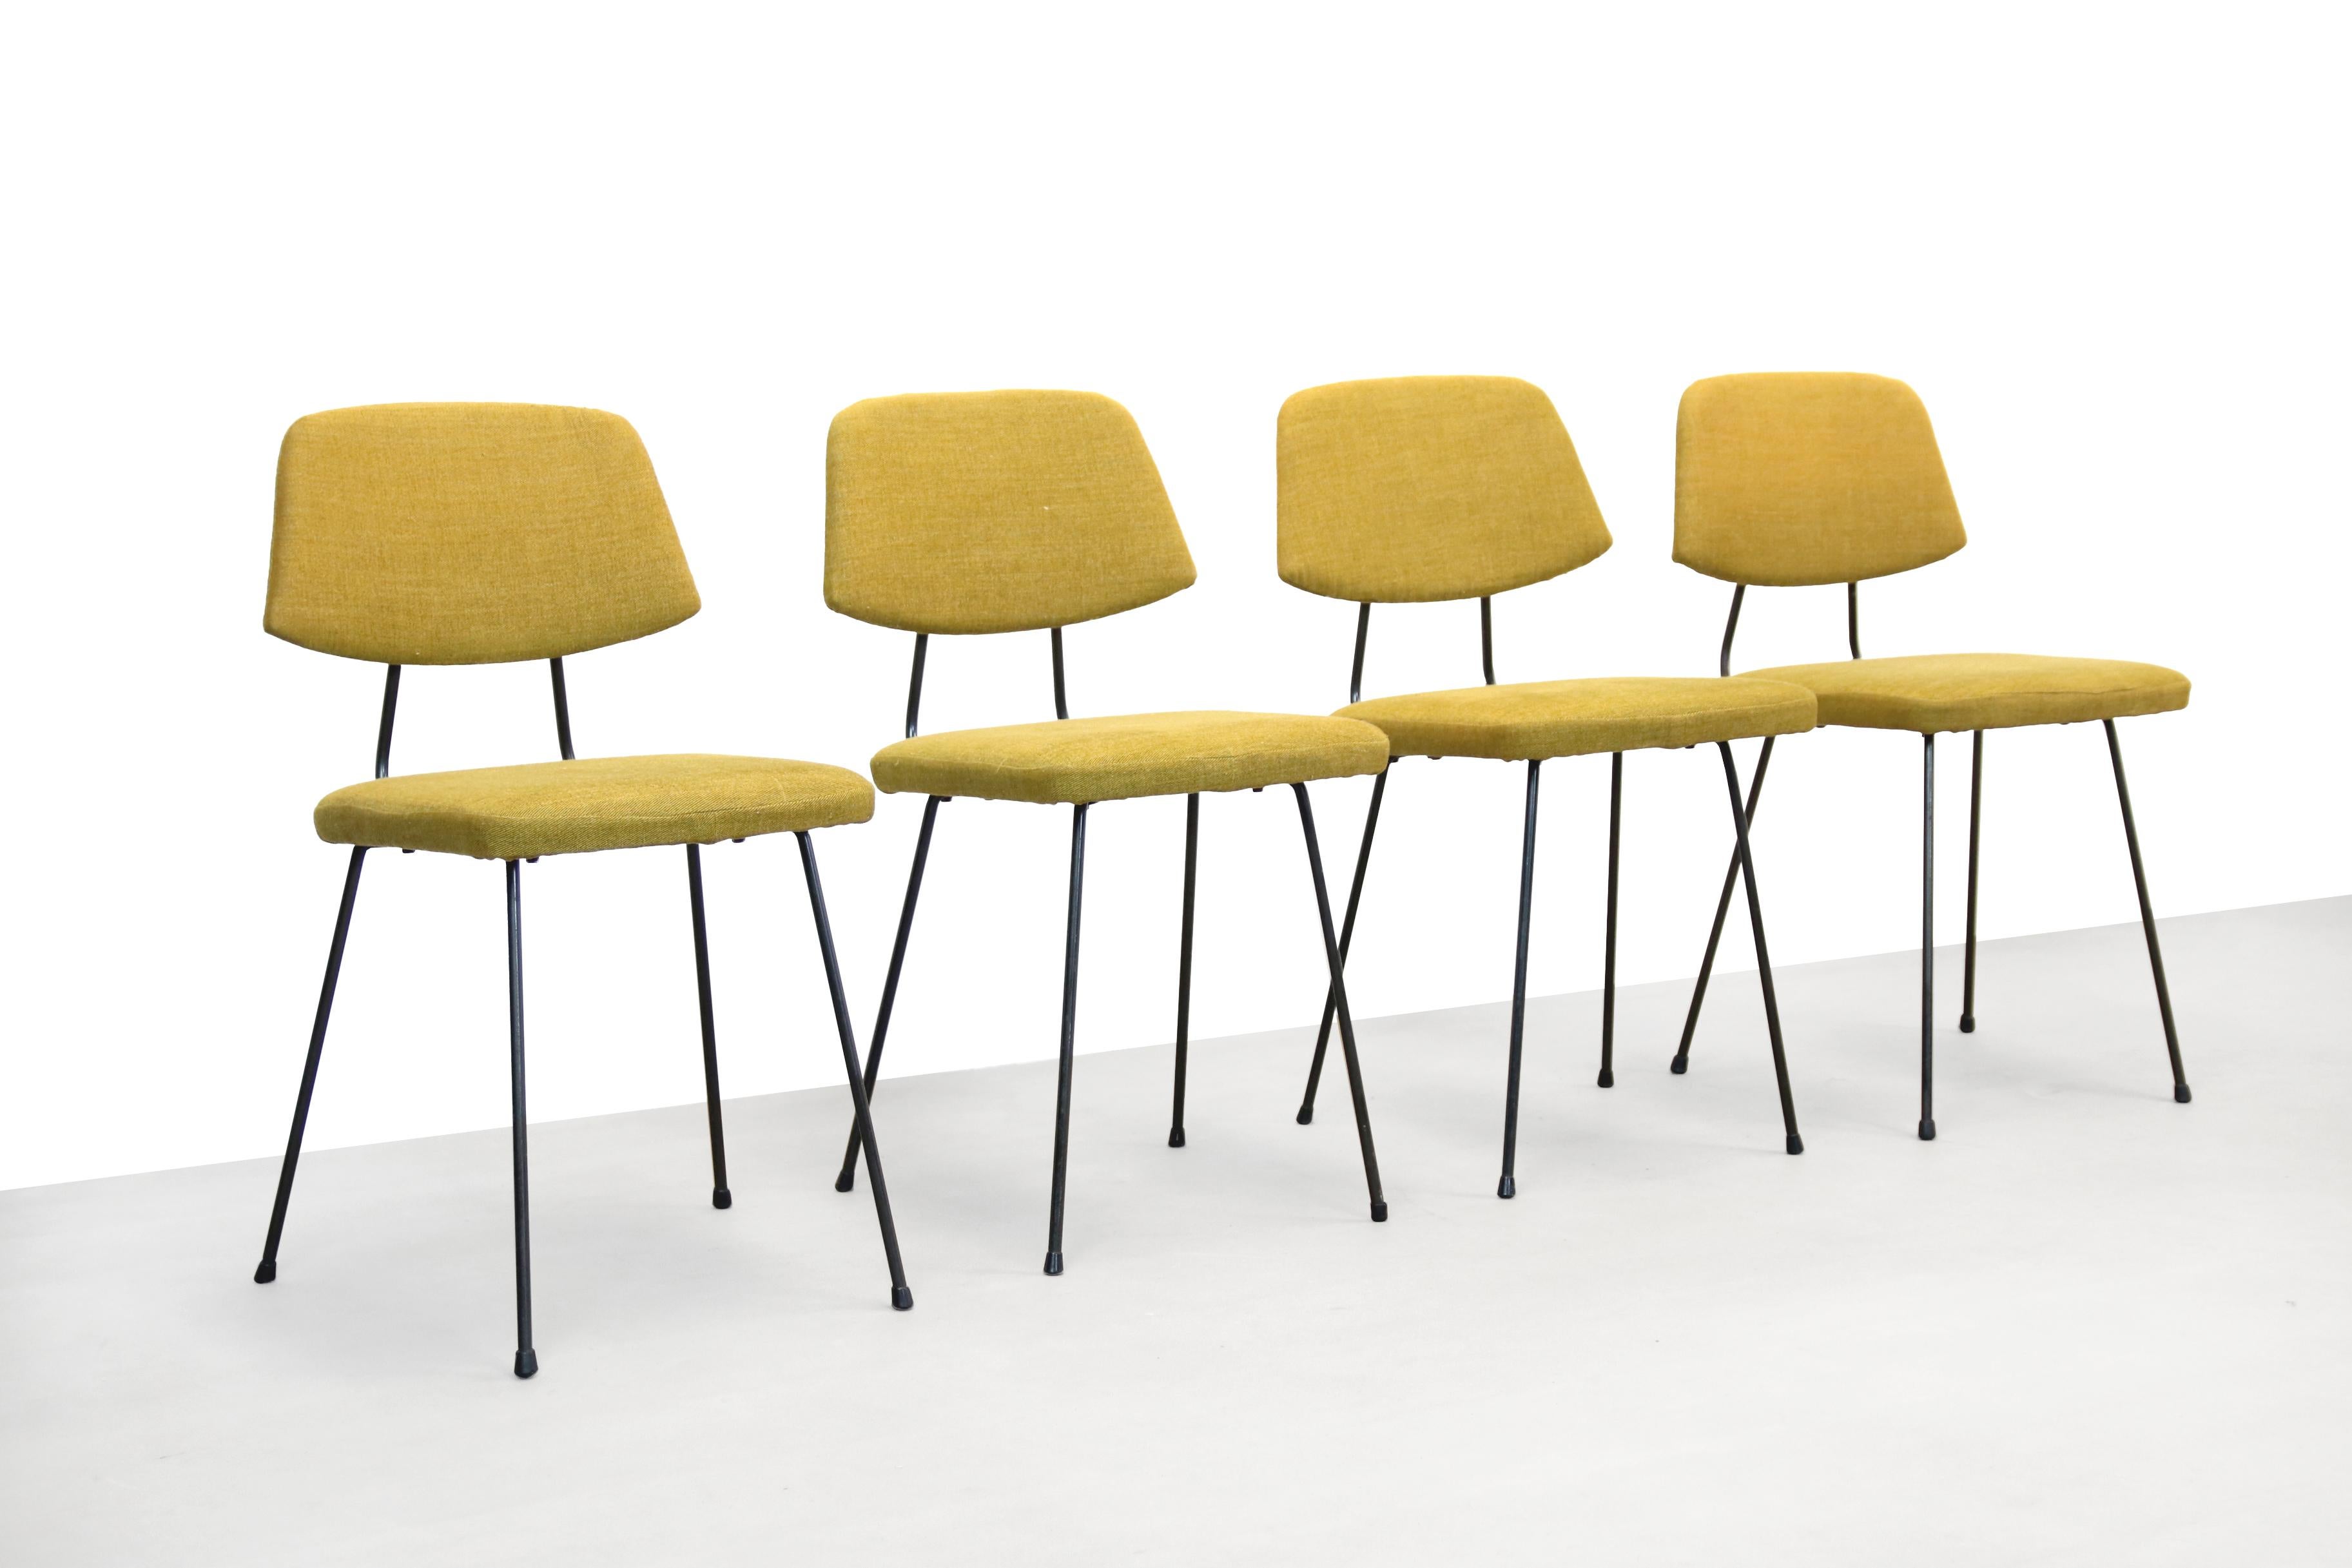 Great set of four dining room chairs by Rudolf Wolf for Elsrijk. The frame is made of black lacquered metal and the chairs are covered with a warm yellow mixed upholstery fabric from Leolux. The total height of the chairs is 79 cm, the seat height